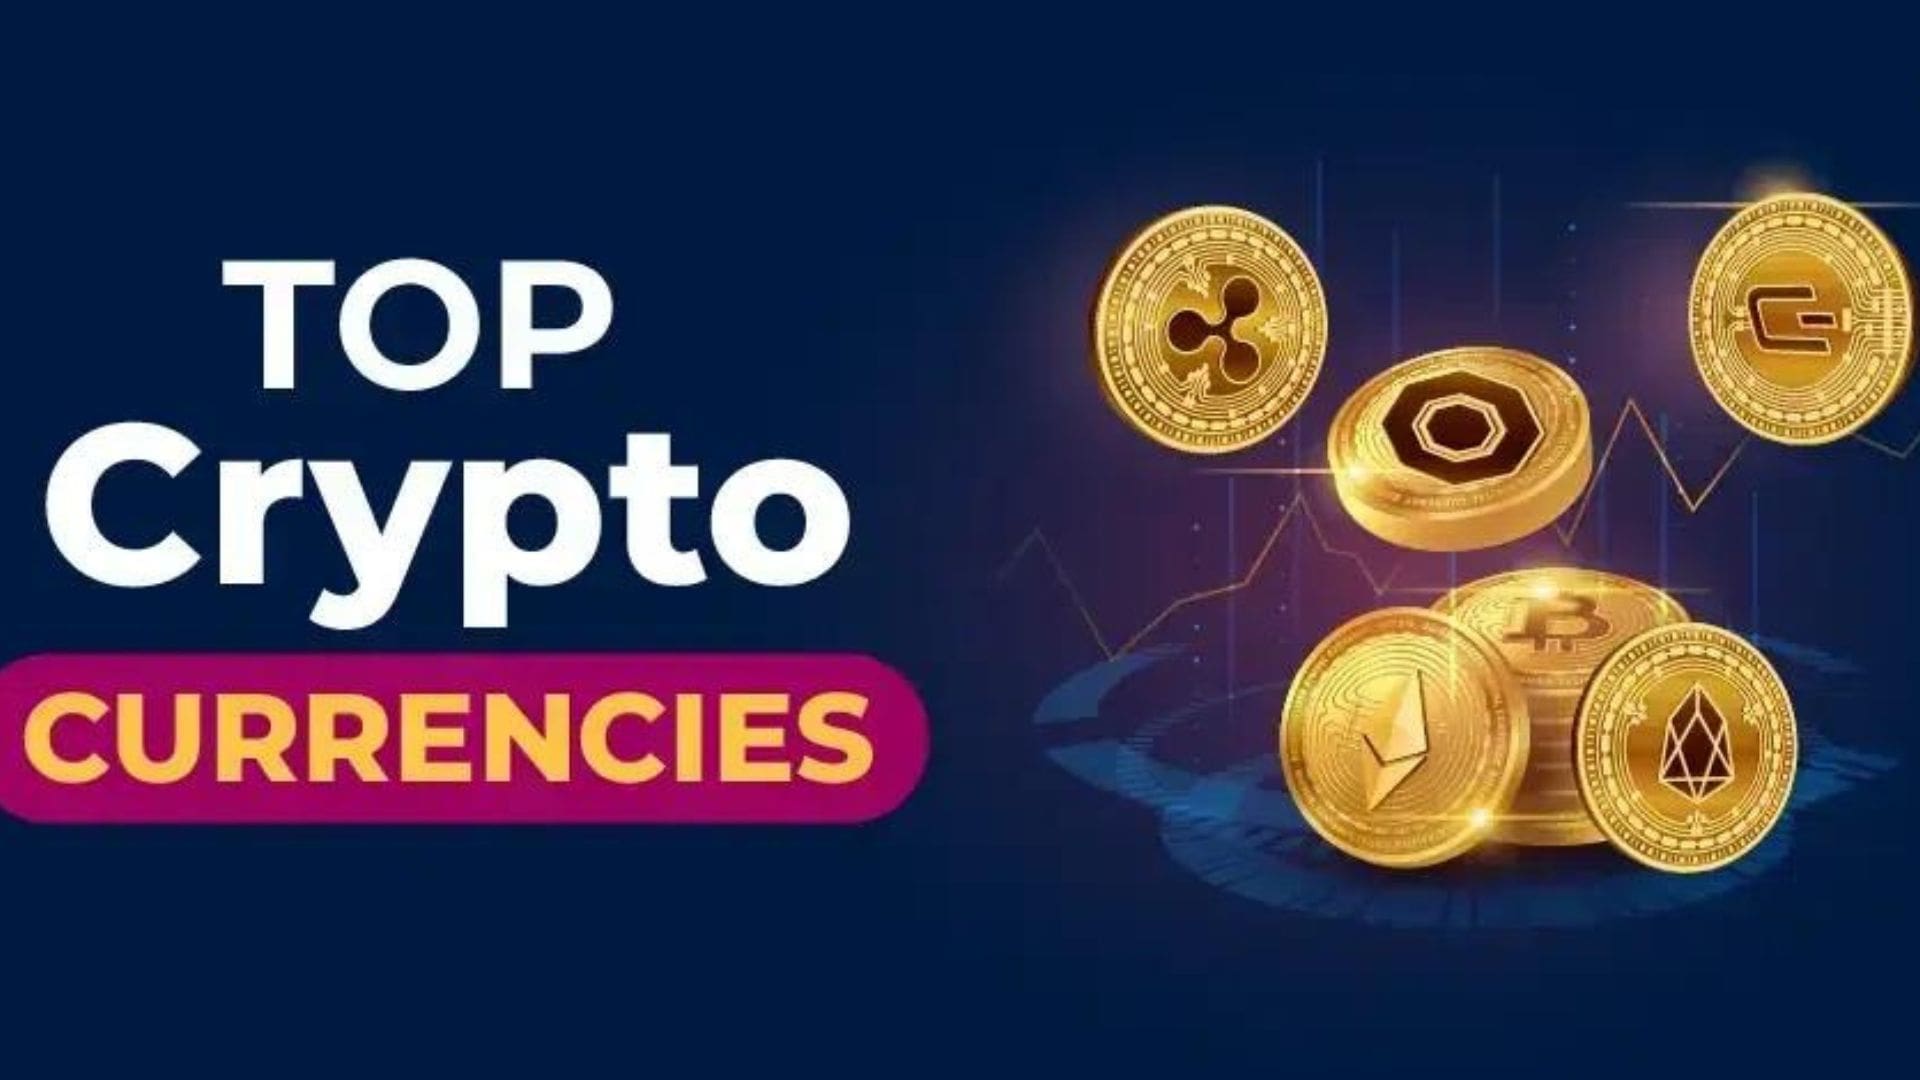 Top Cryptocurrencies in the World